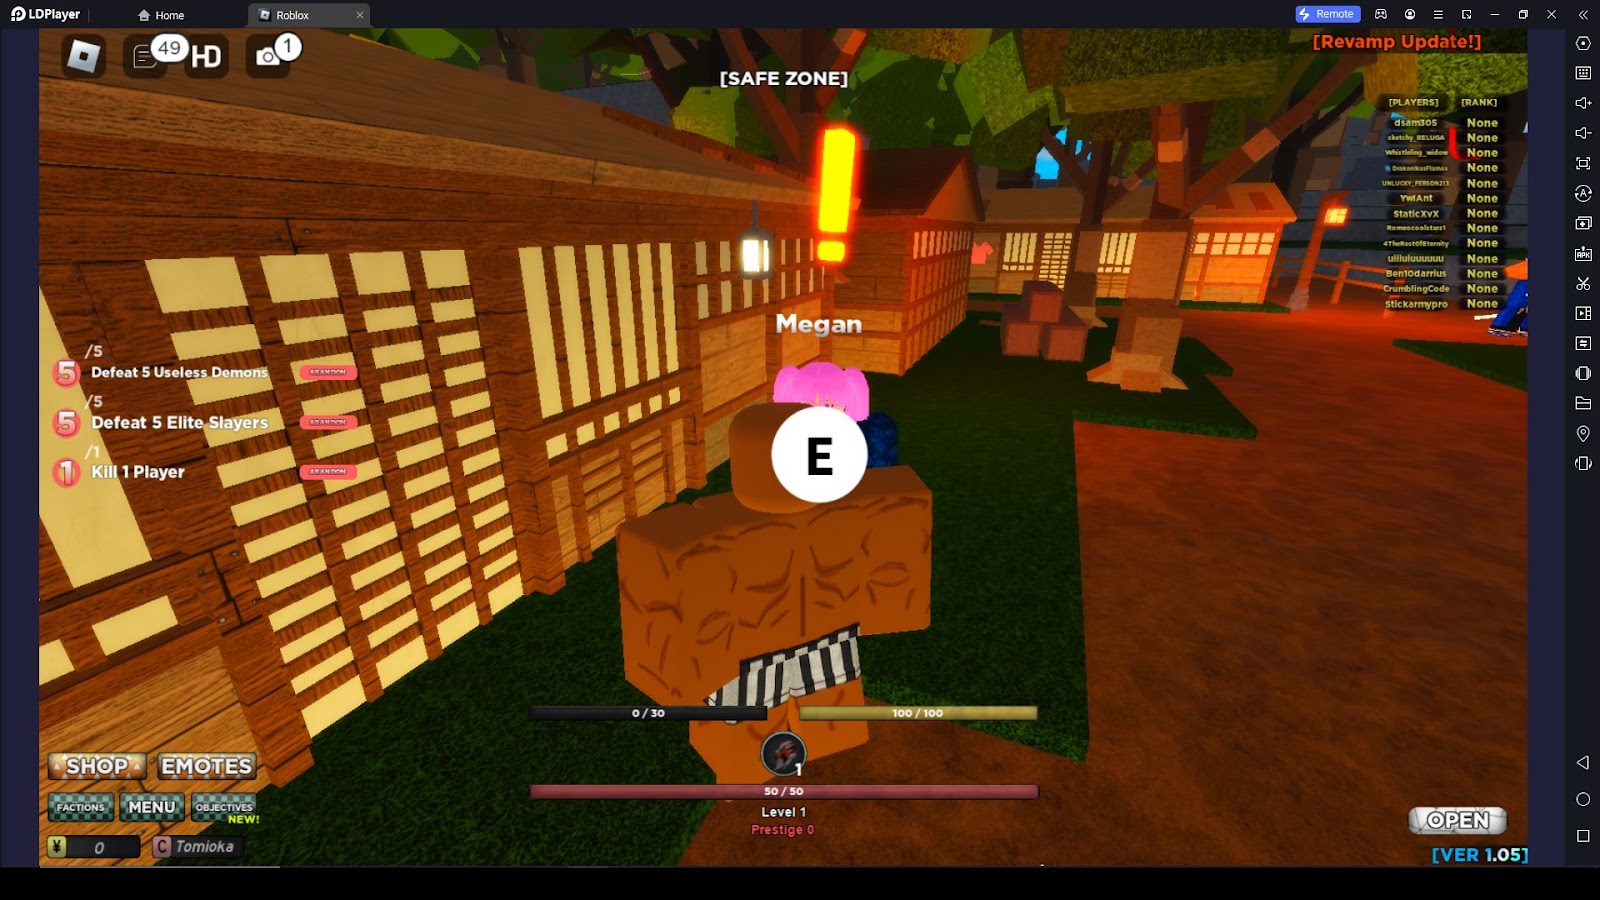 UPDATE 2] Slayers Unleashed Revamped How To Use Codes Guide [17 New Codes]  Roblox 